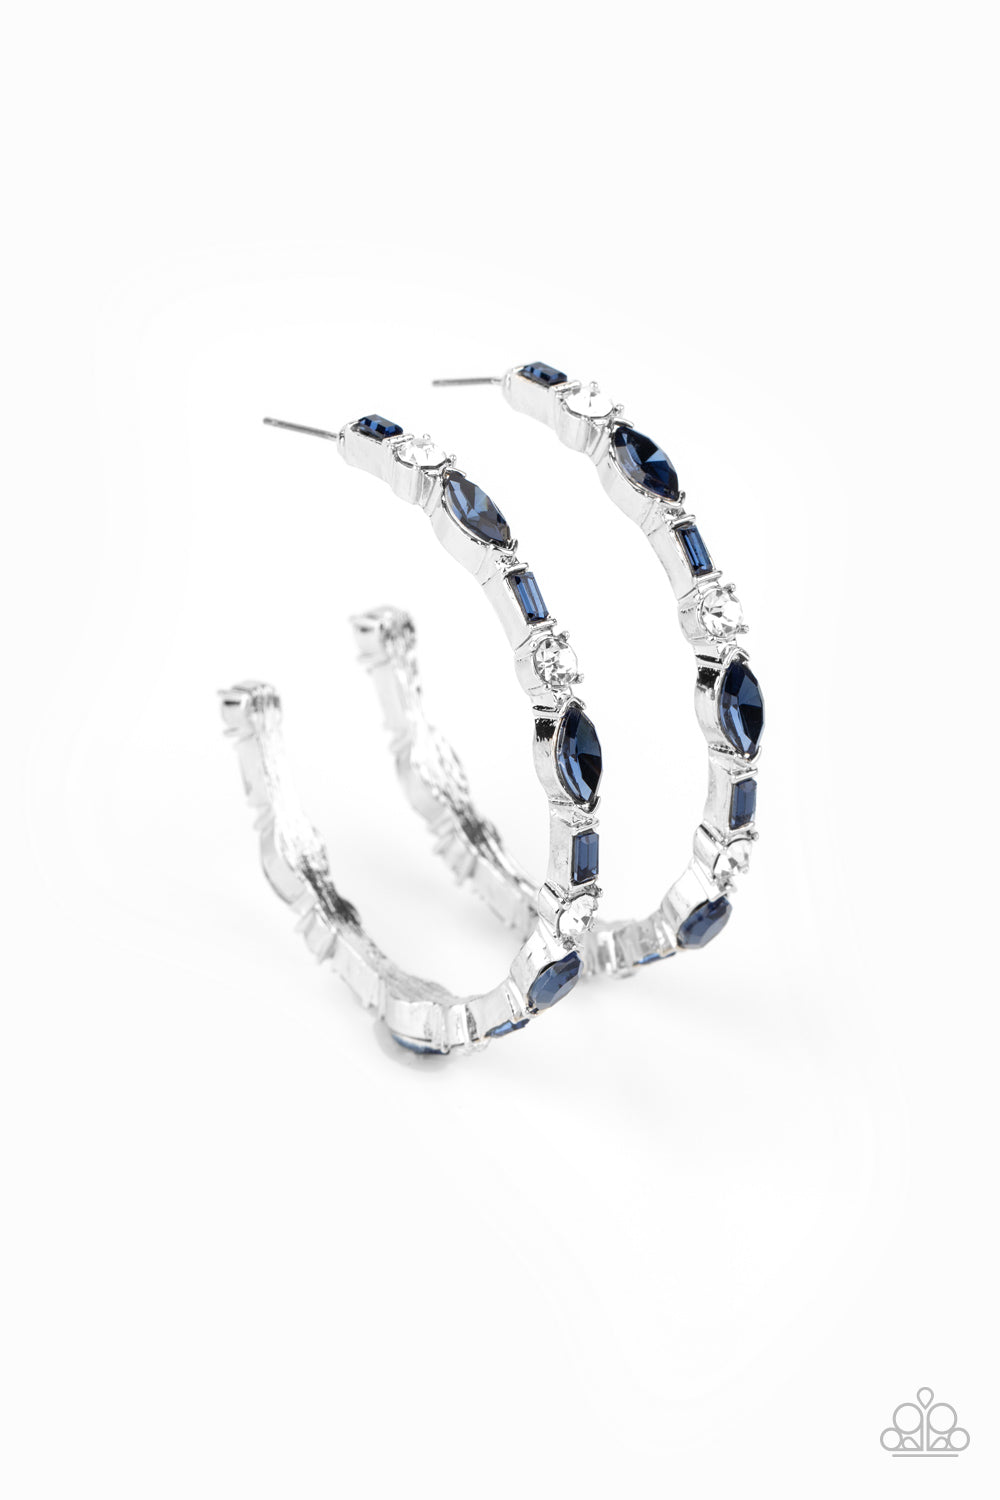 Featuring round, emerald, and marquise style cuts, a glittery collection of blue and white rhinestones coalesce into a sparkly hoop for a glamorous finish. Earring attaches to a standard post fitting. Hoop measures approximately 2" in diameter.